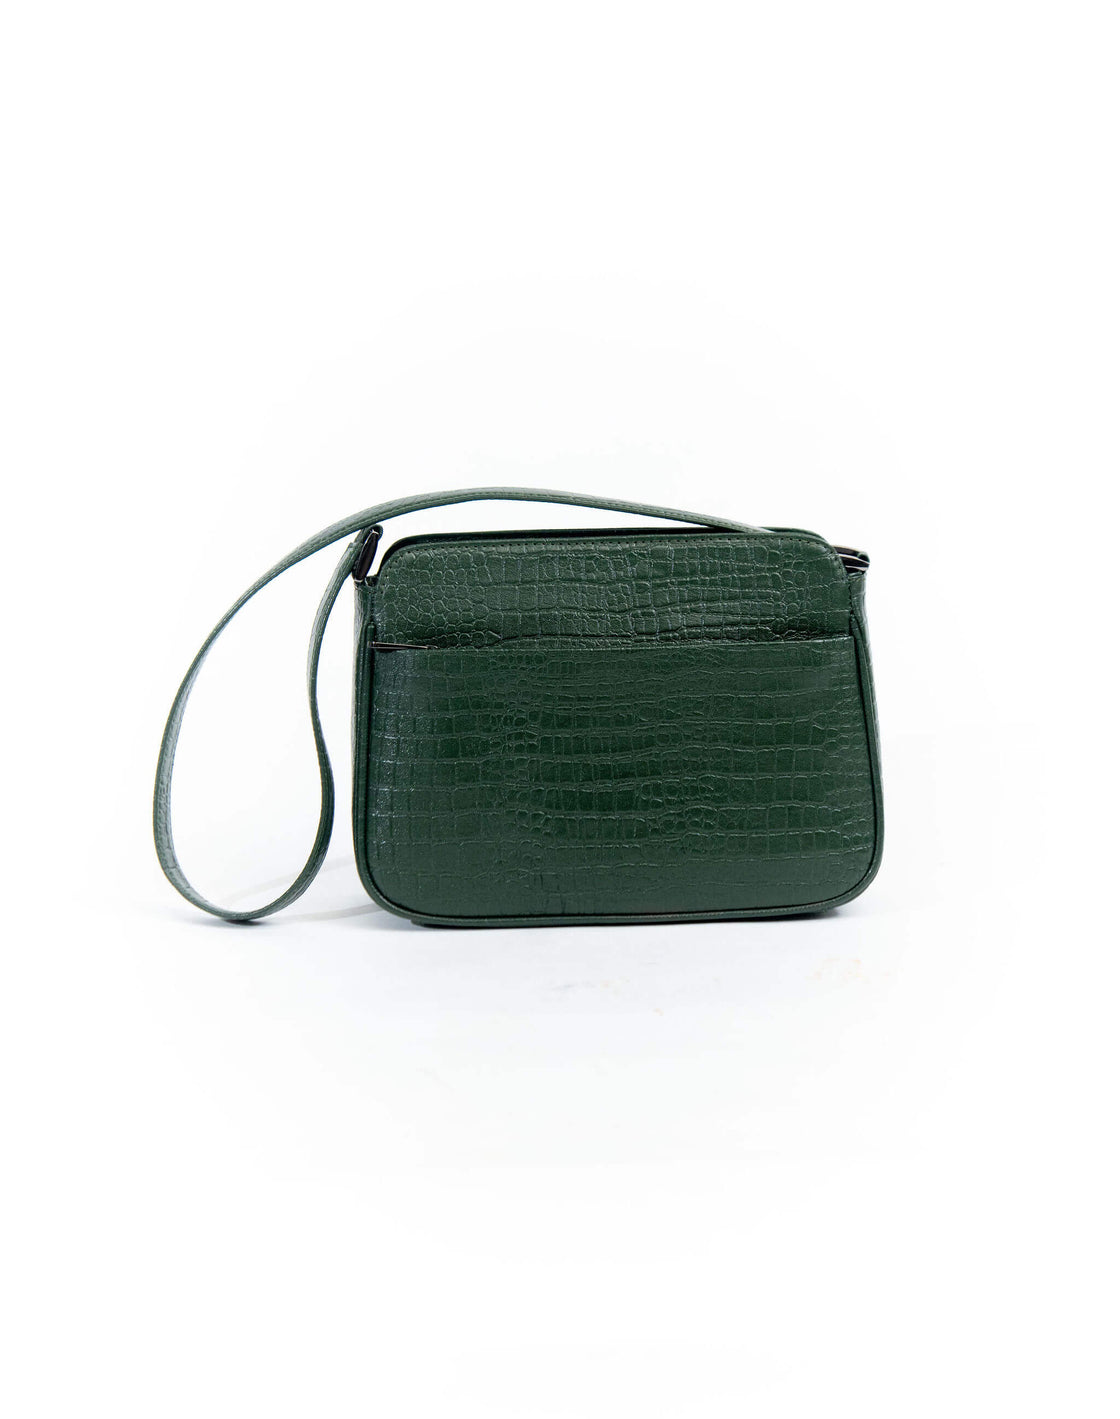 Structured bag - Croco